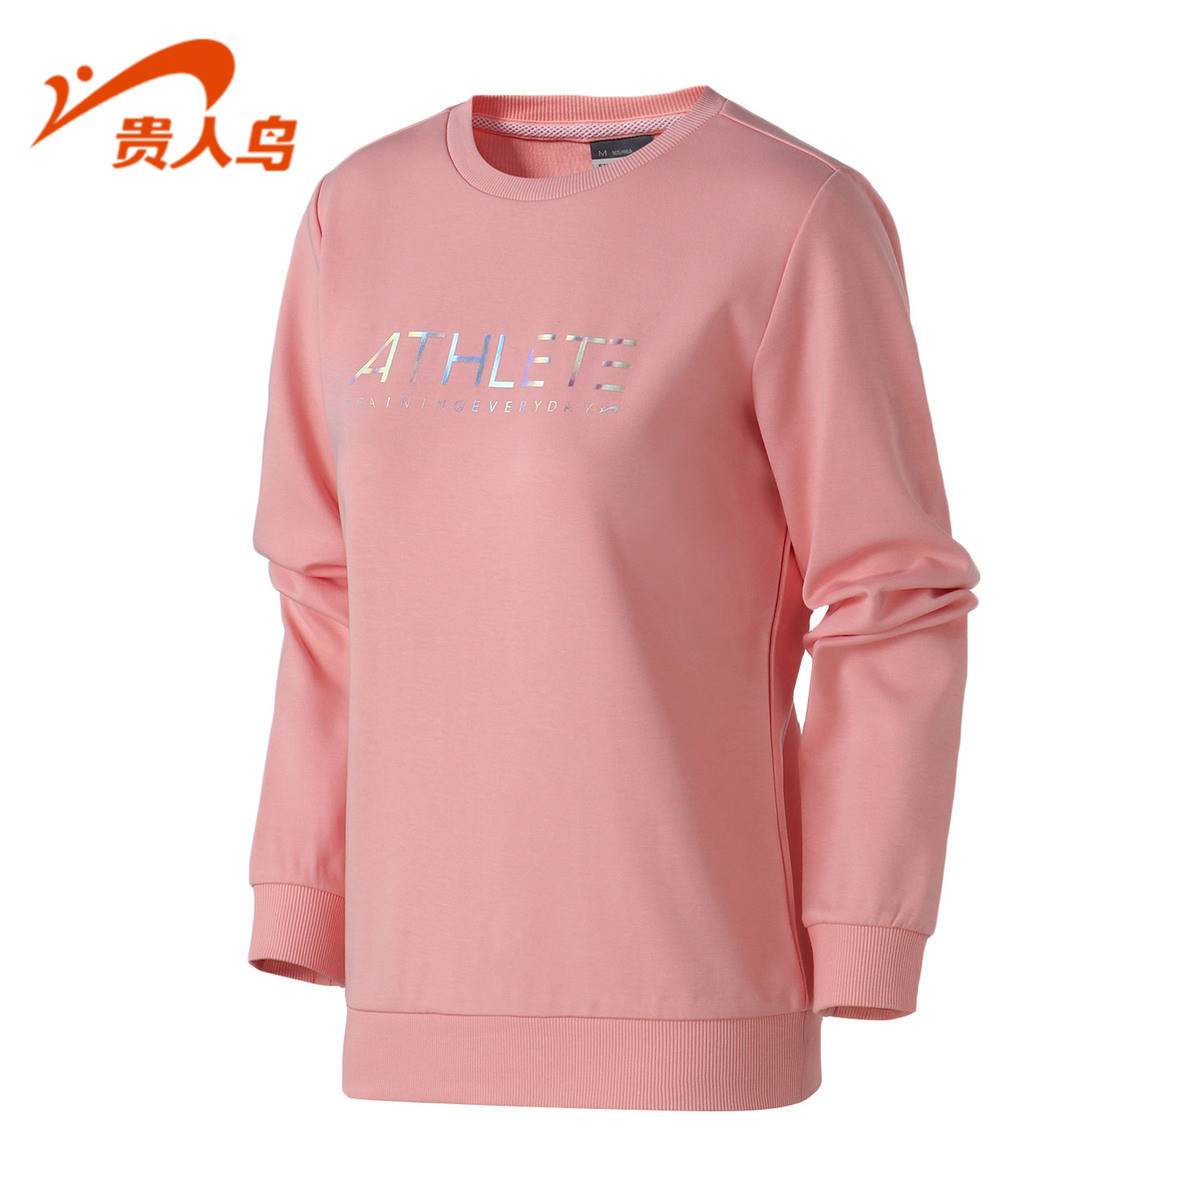 Guirenniao Women's 2019 Spring and Autumn New Sports Sweater Round Neck Printed Running Wear Casual Bottom Pullover